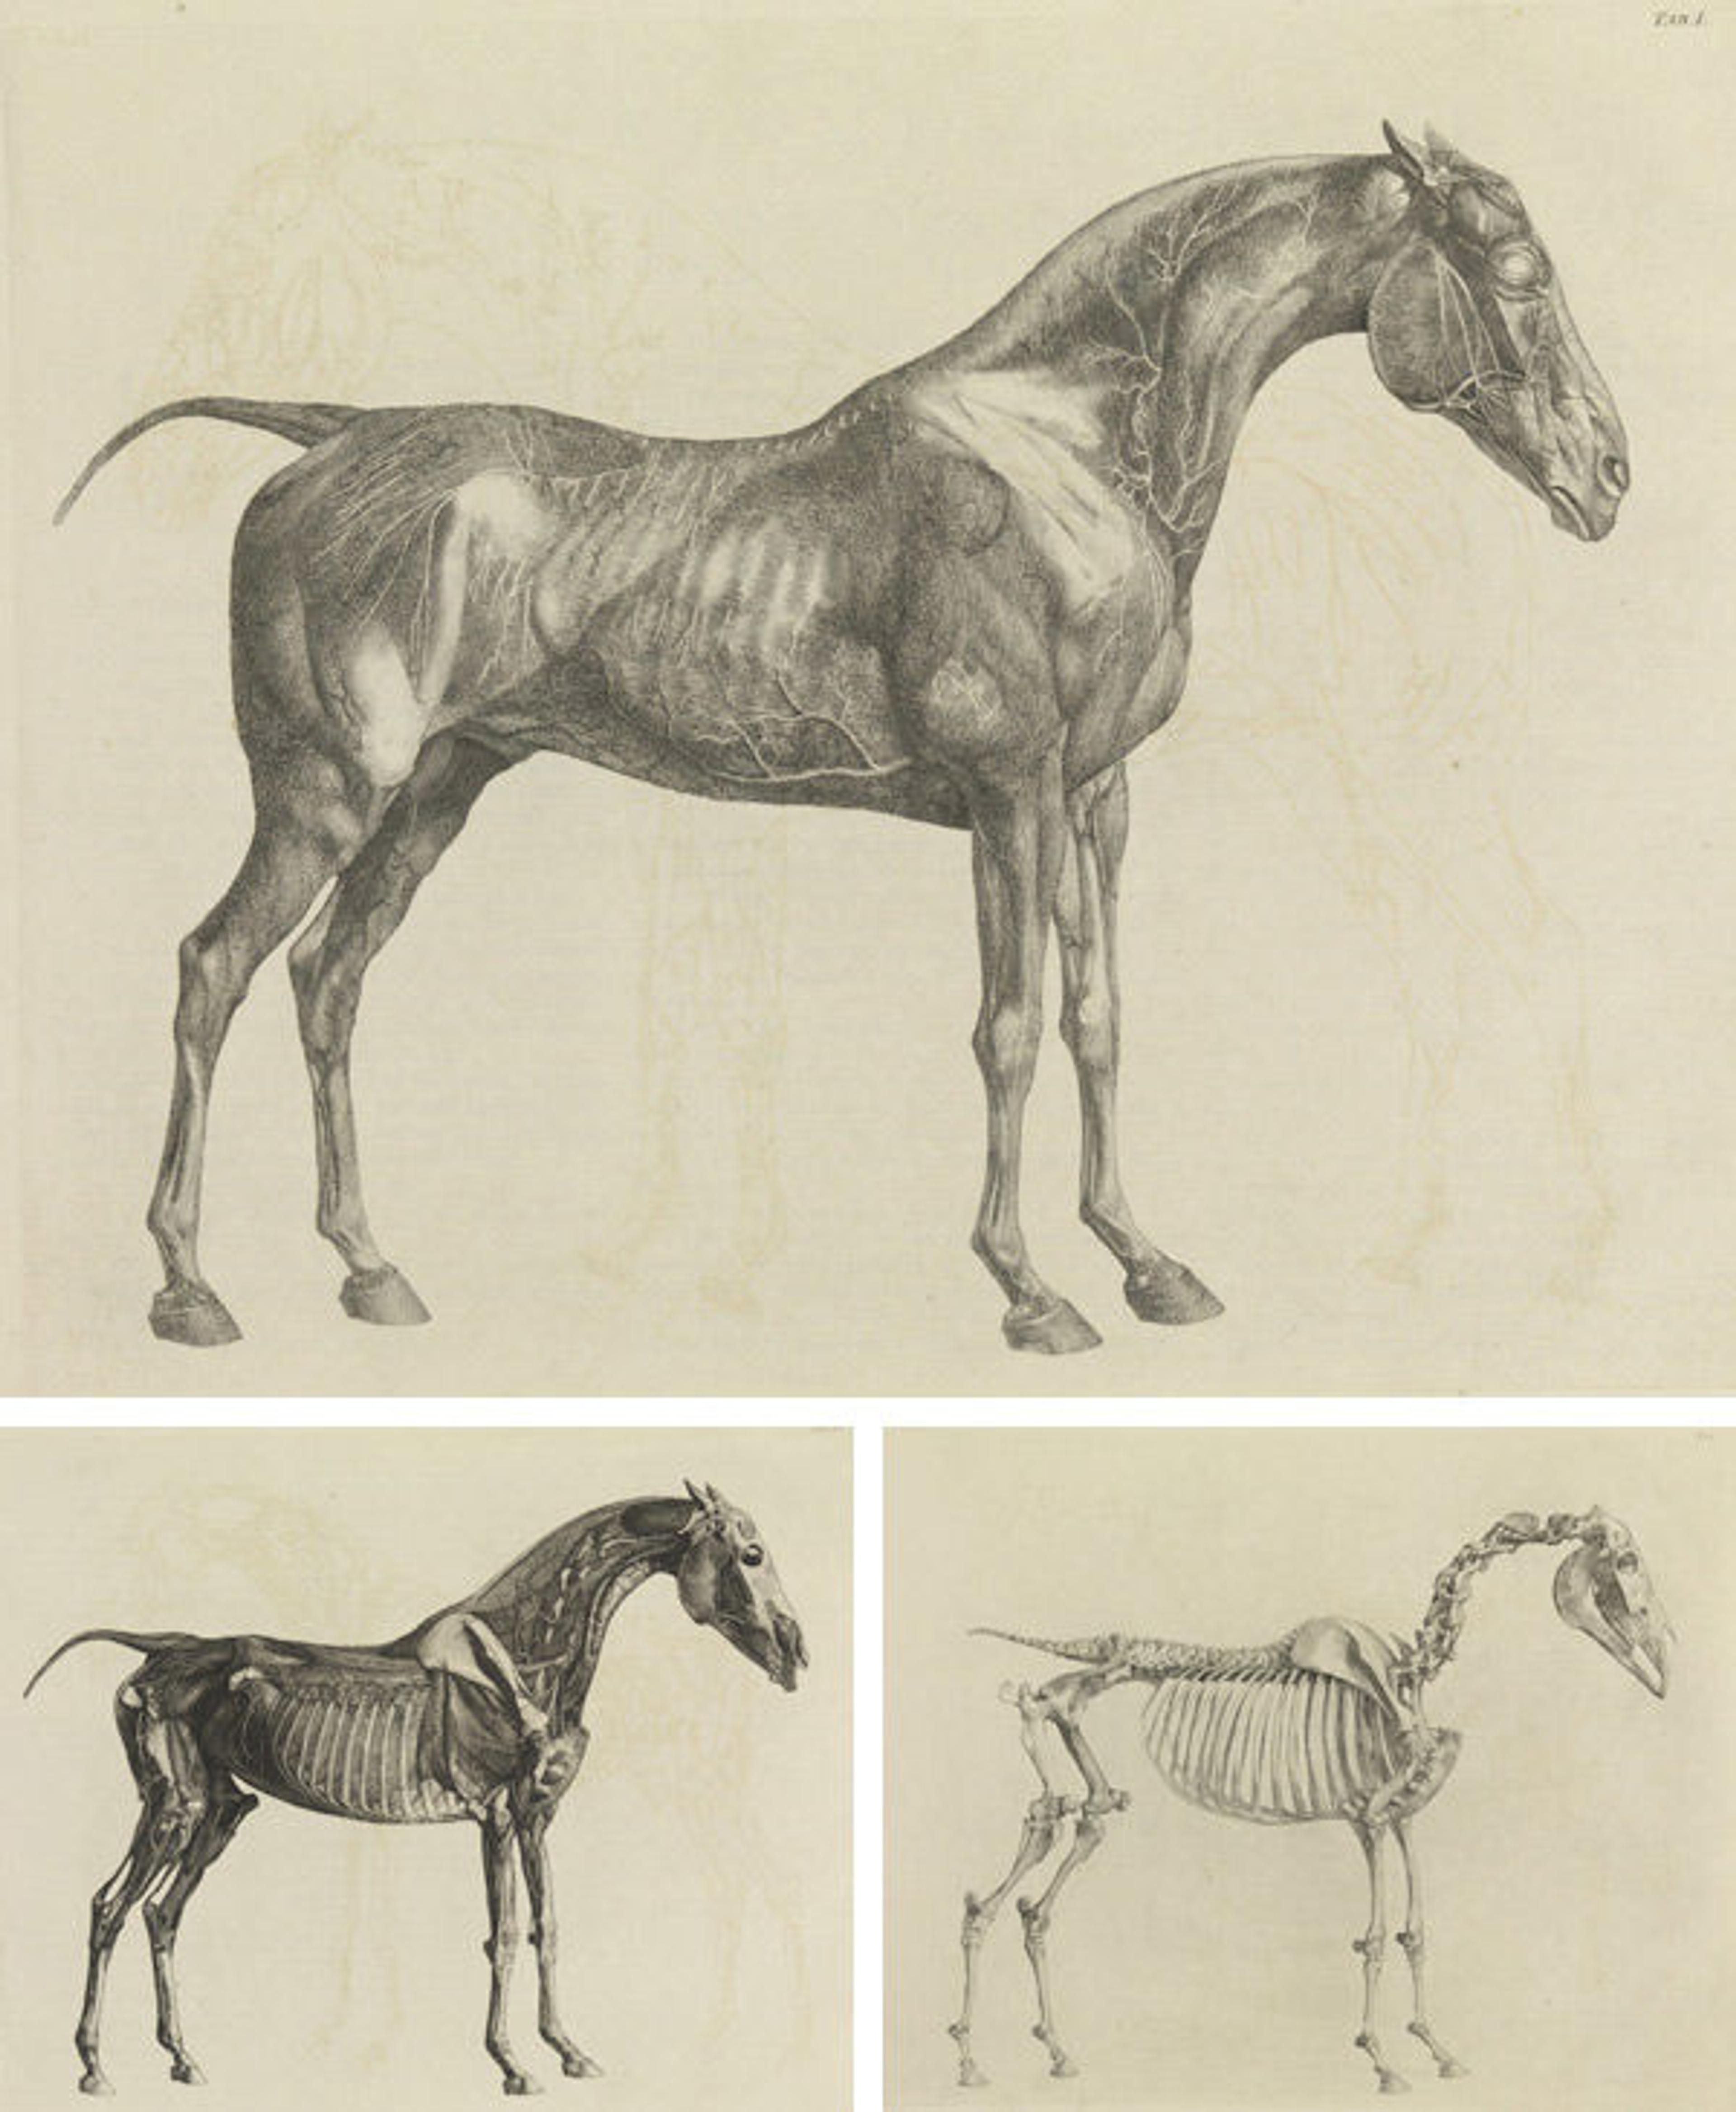 George Stubbs (British, 1724–1806). Three plates from The Anatomy of the Horse, 1766. Plates: etching; 18 1/4 x 23 in. (46.4 x 58.4 cm). The Metropolitan Museum of Art, New York, Gift of Lincoln Kirstein, 1953 (53.599.1bis)